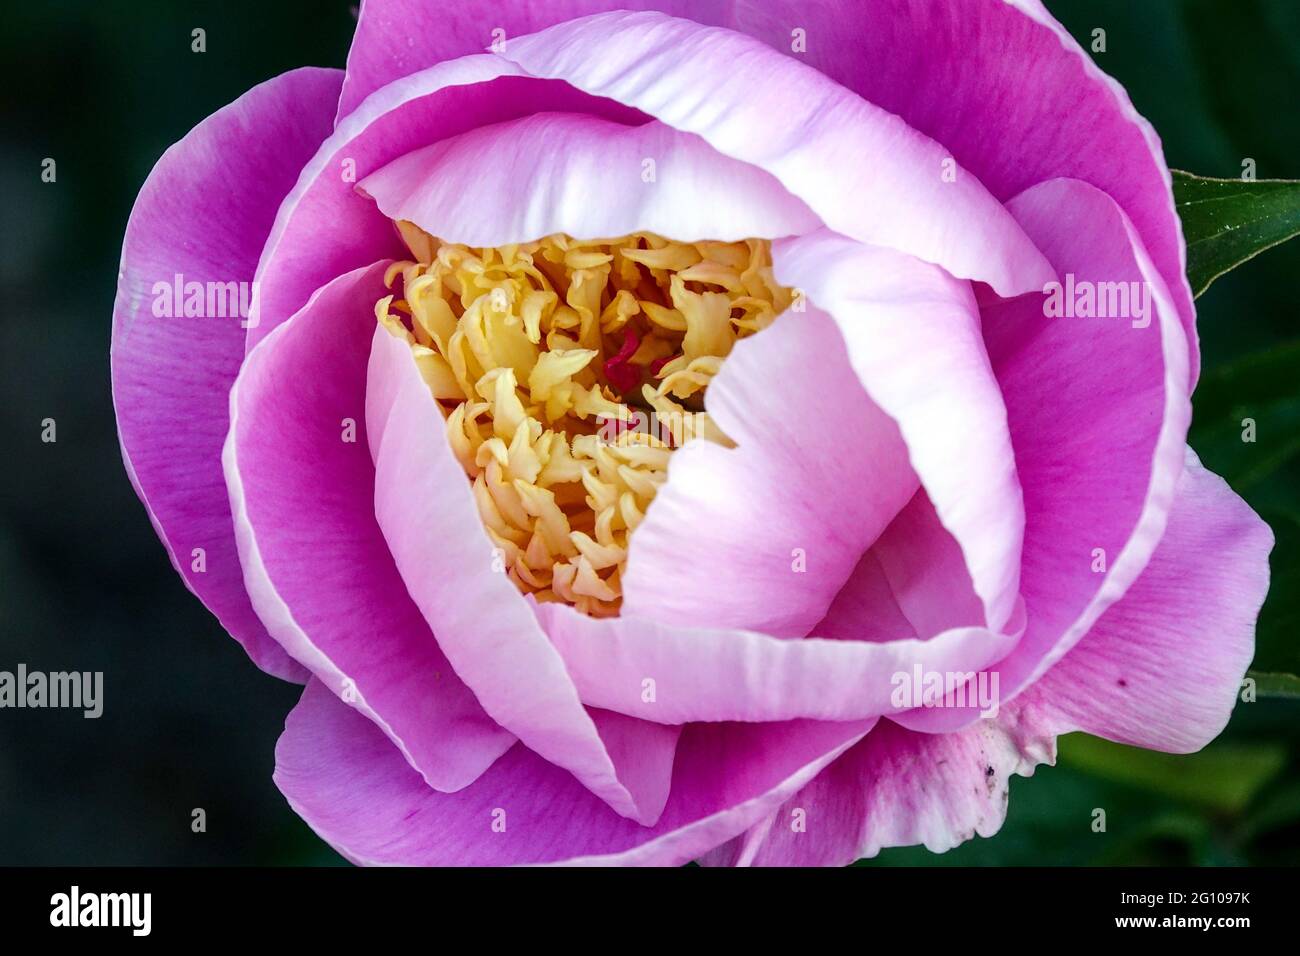 Beauty Cup-shaped Pink Flower Fragrant Vibrant Opening Bowl Plant Stock Photo